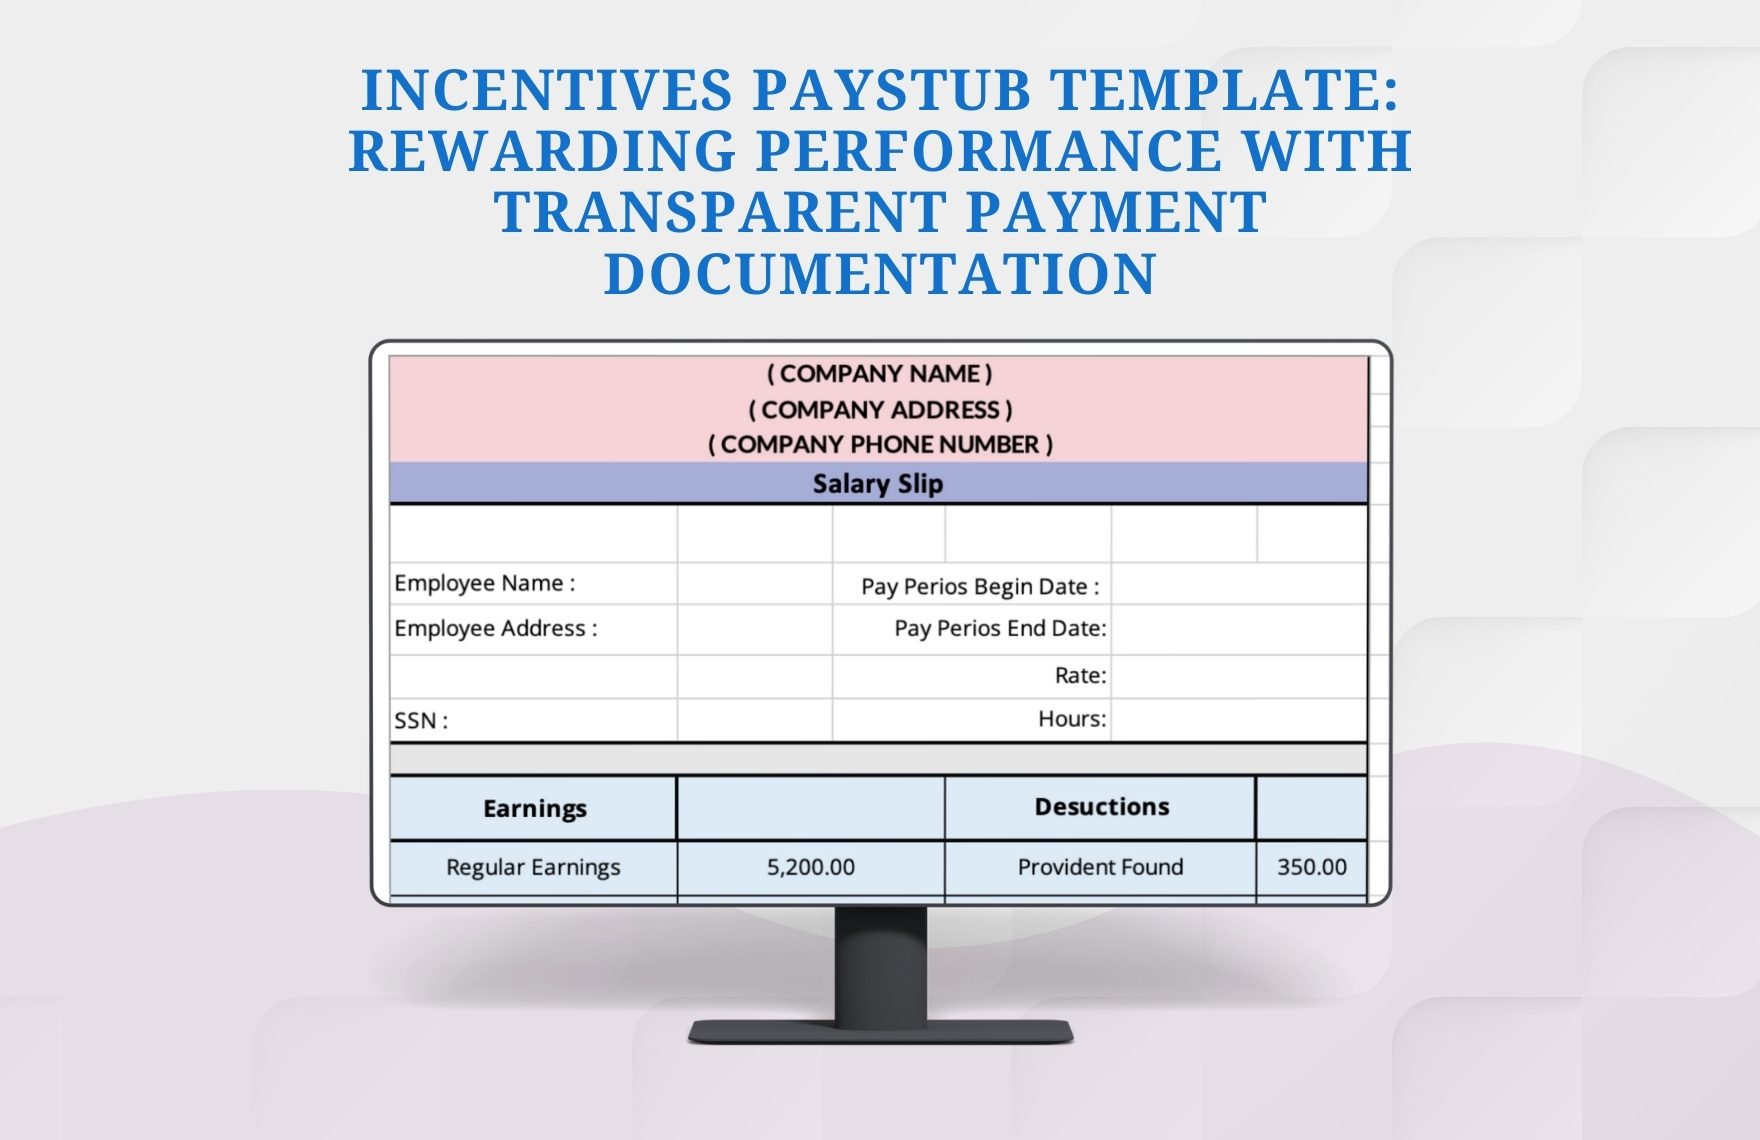 Incentives Pay Stub Template